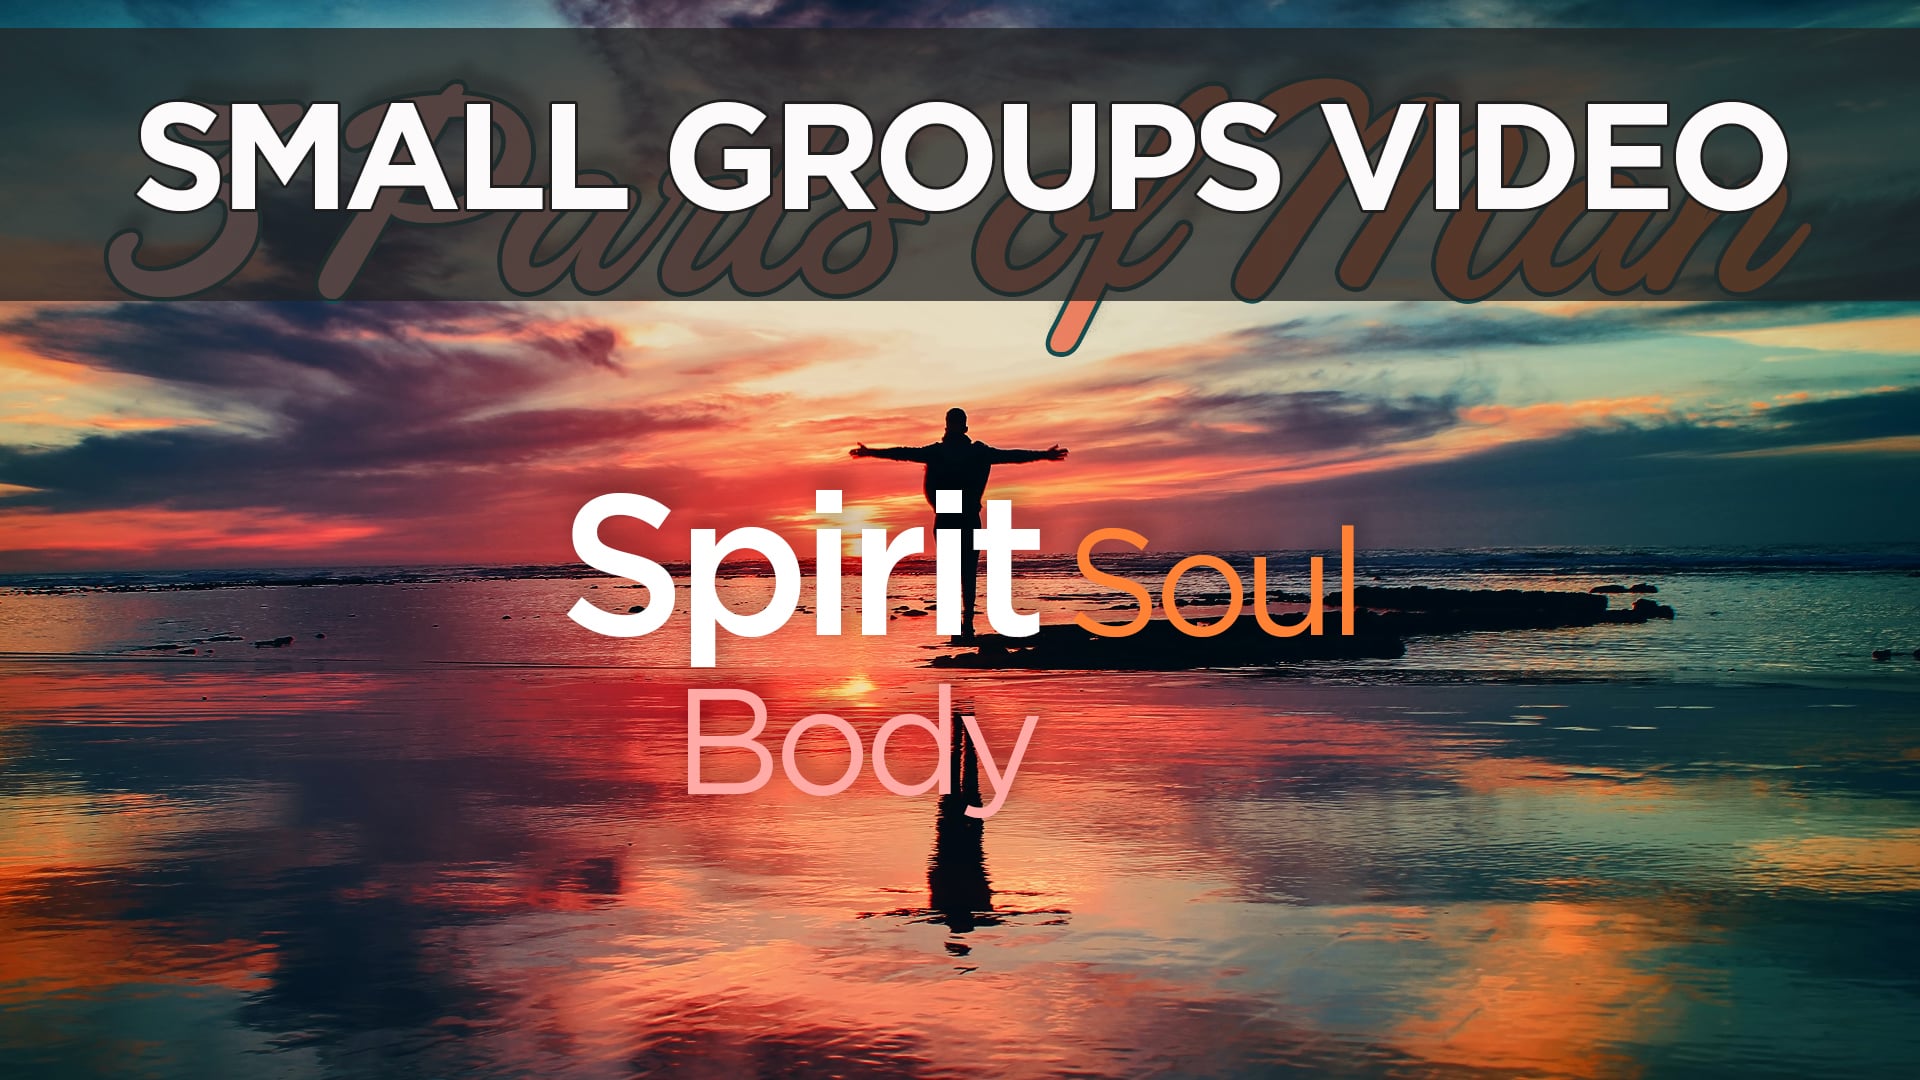 Small Groups Video - 6 Weeks of Body, Soul, Spirit - Session 3